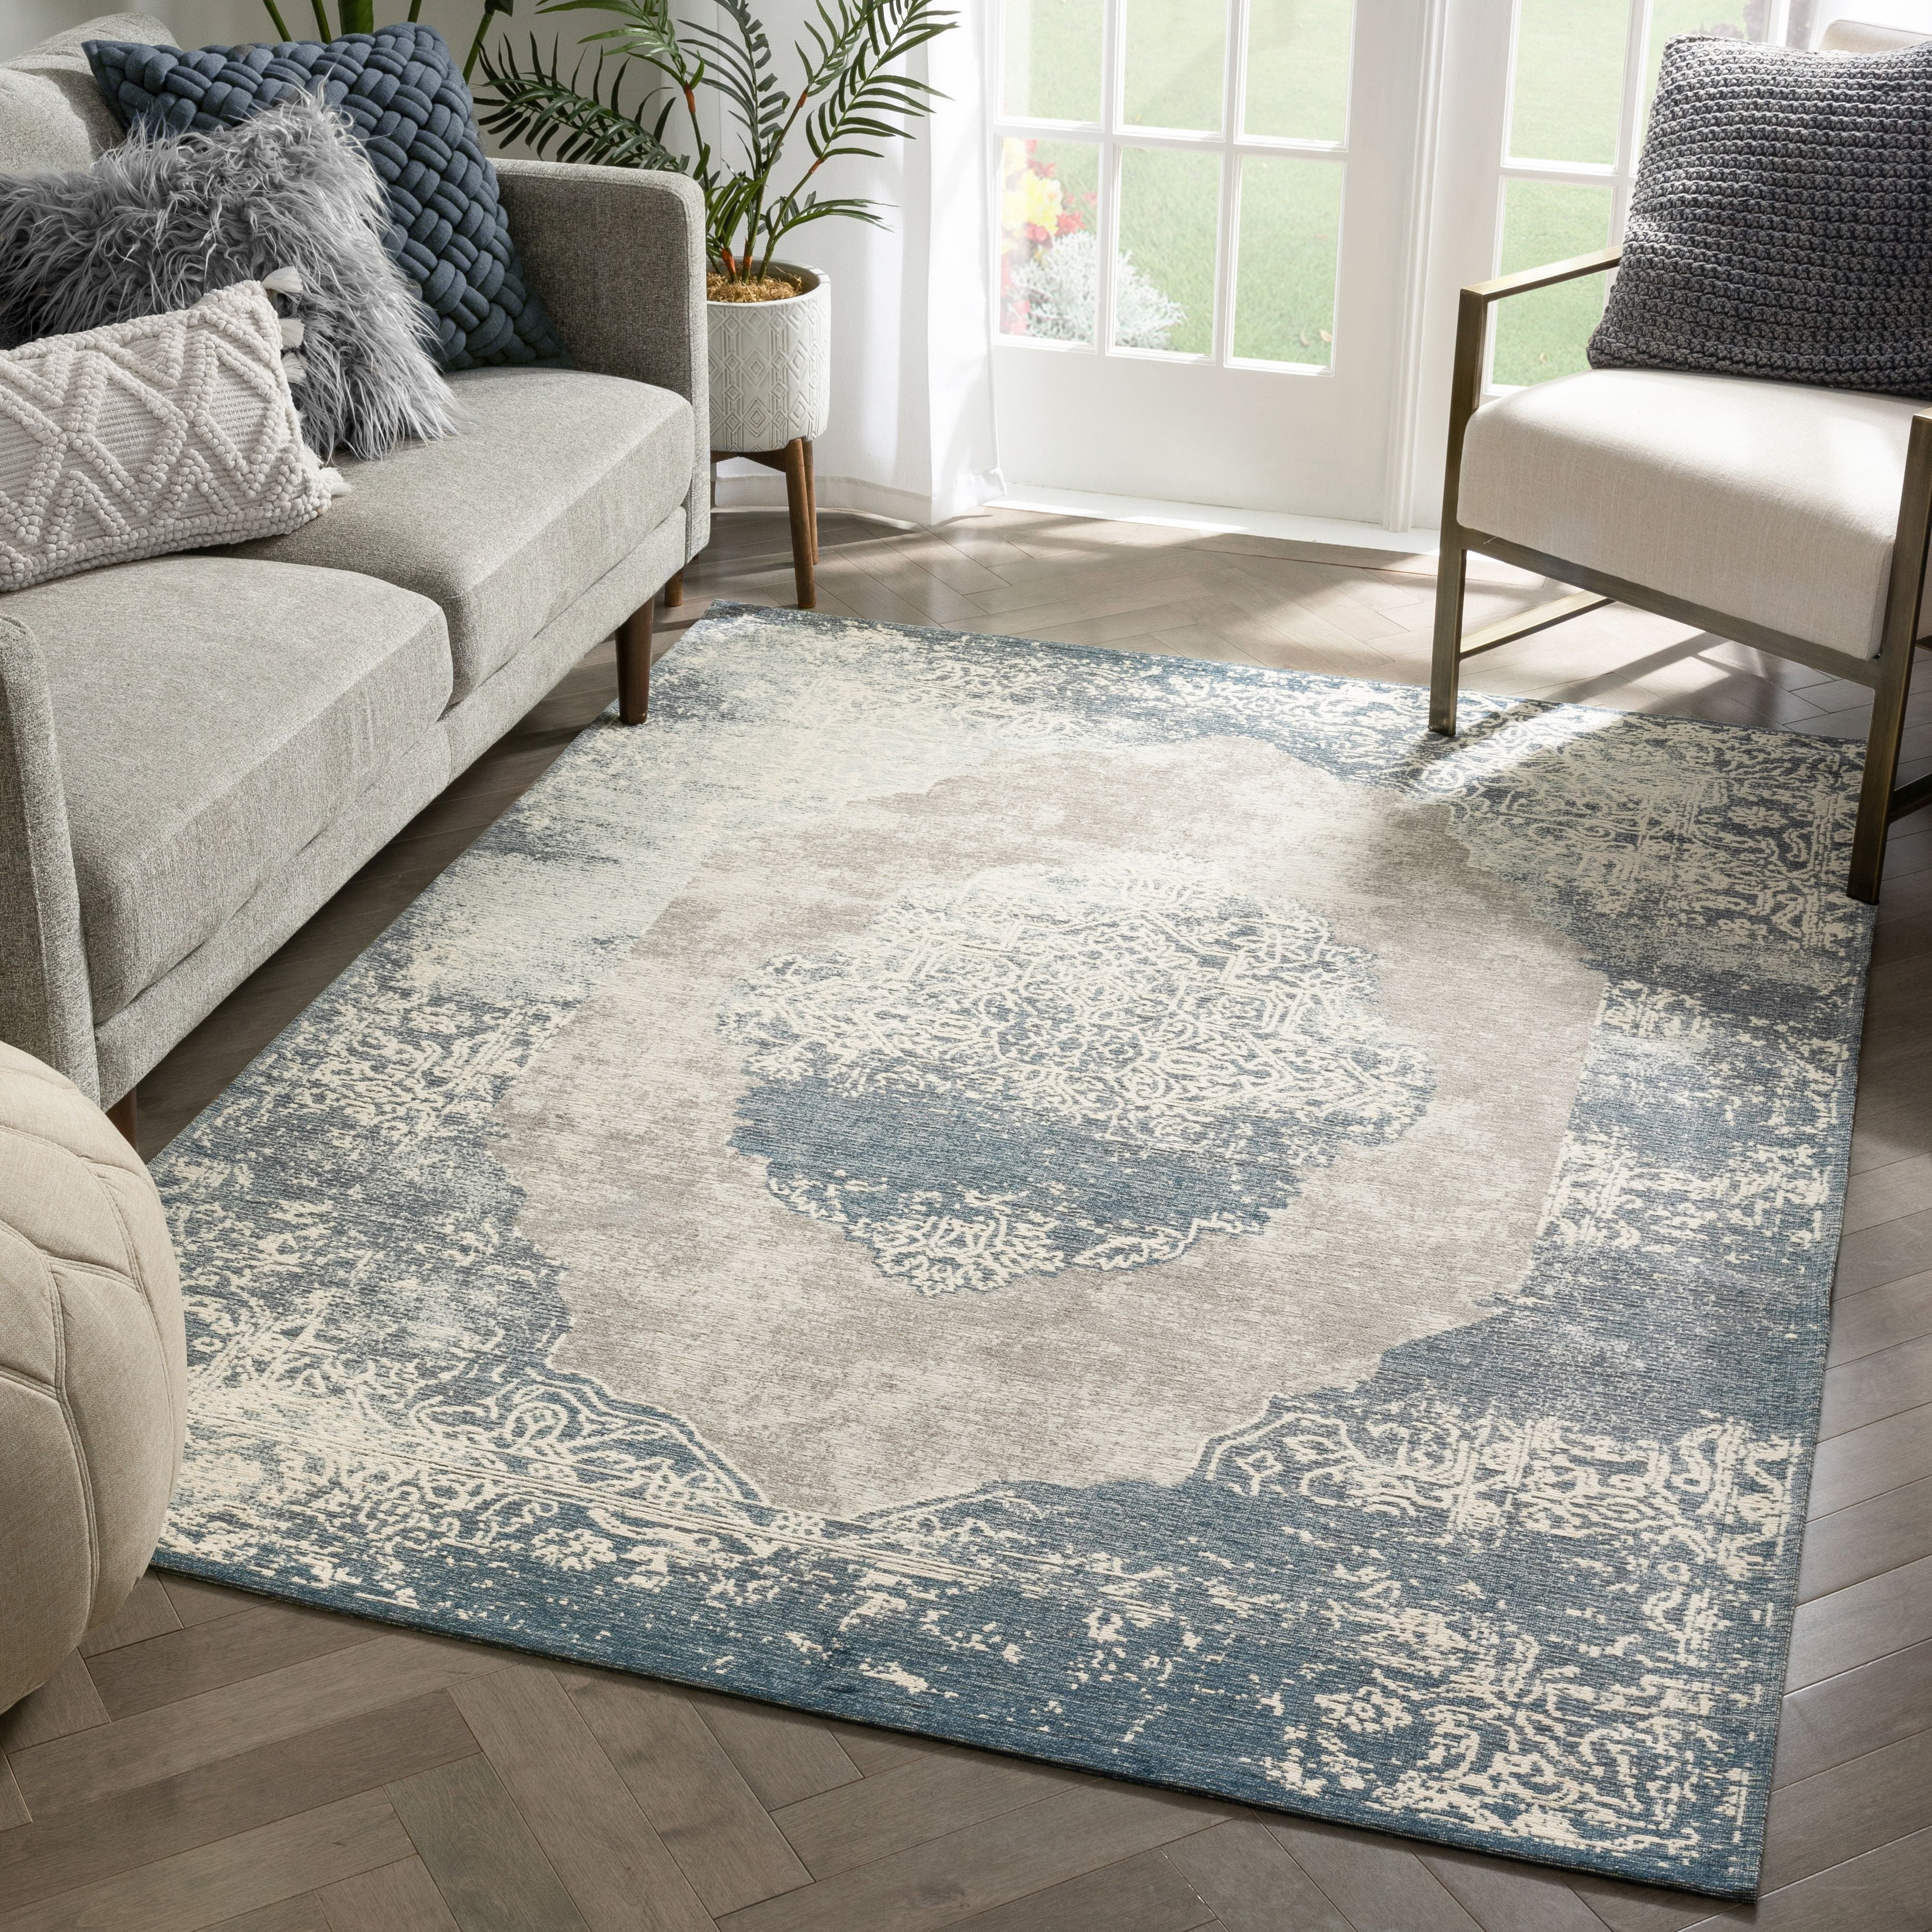 Well Woven Bisto Blue Distressed Medallion Area Rug 5x7 5'3 x 7'3